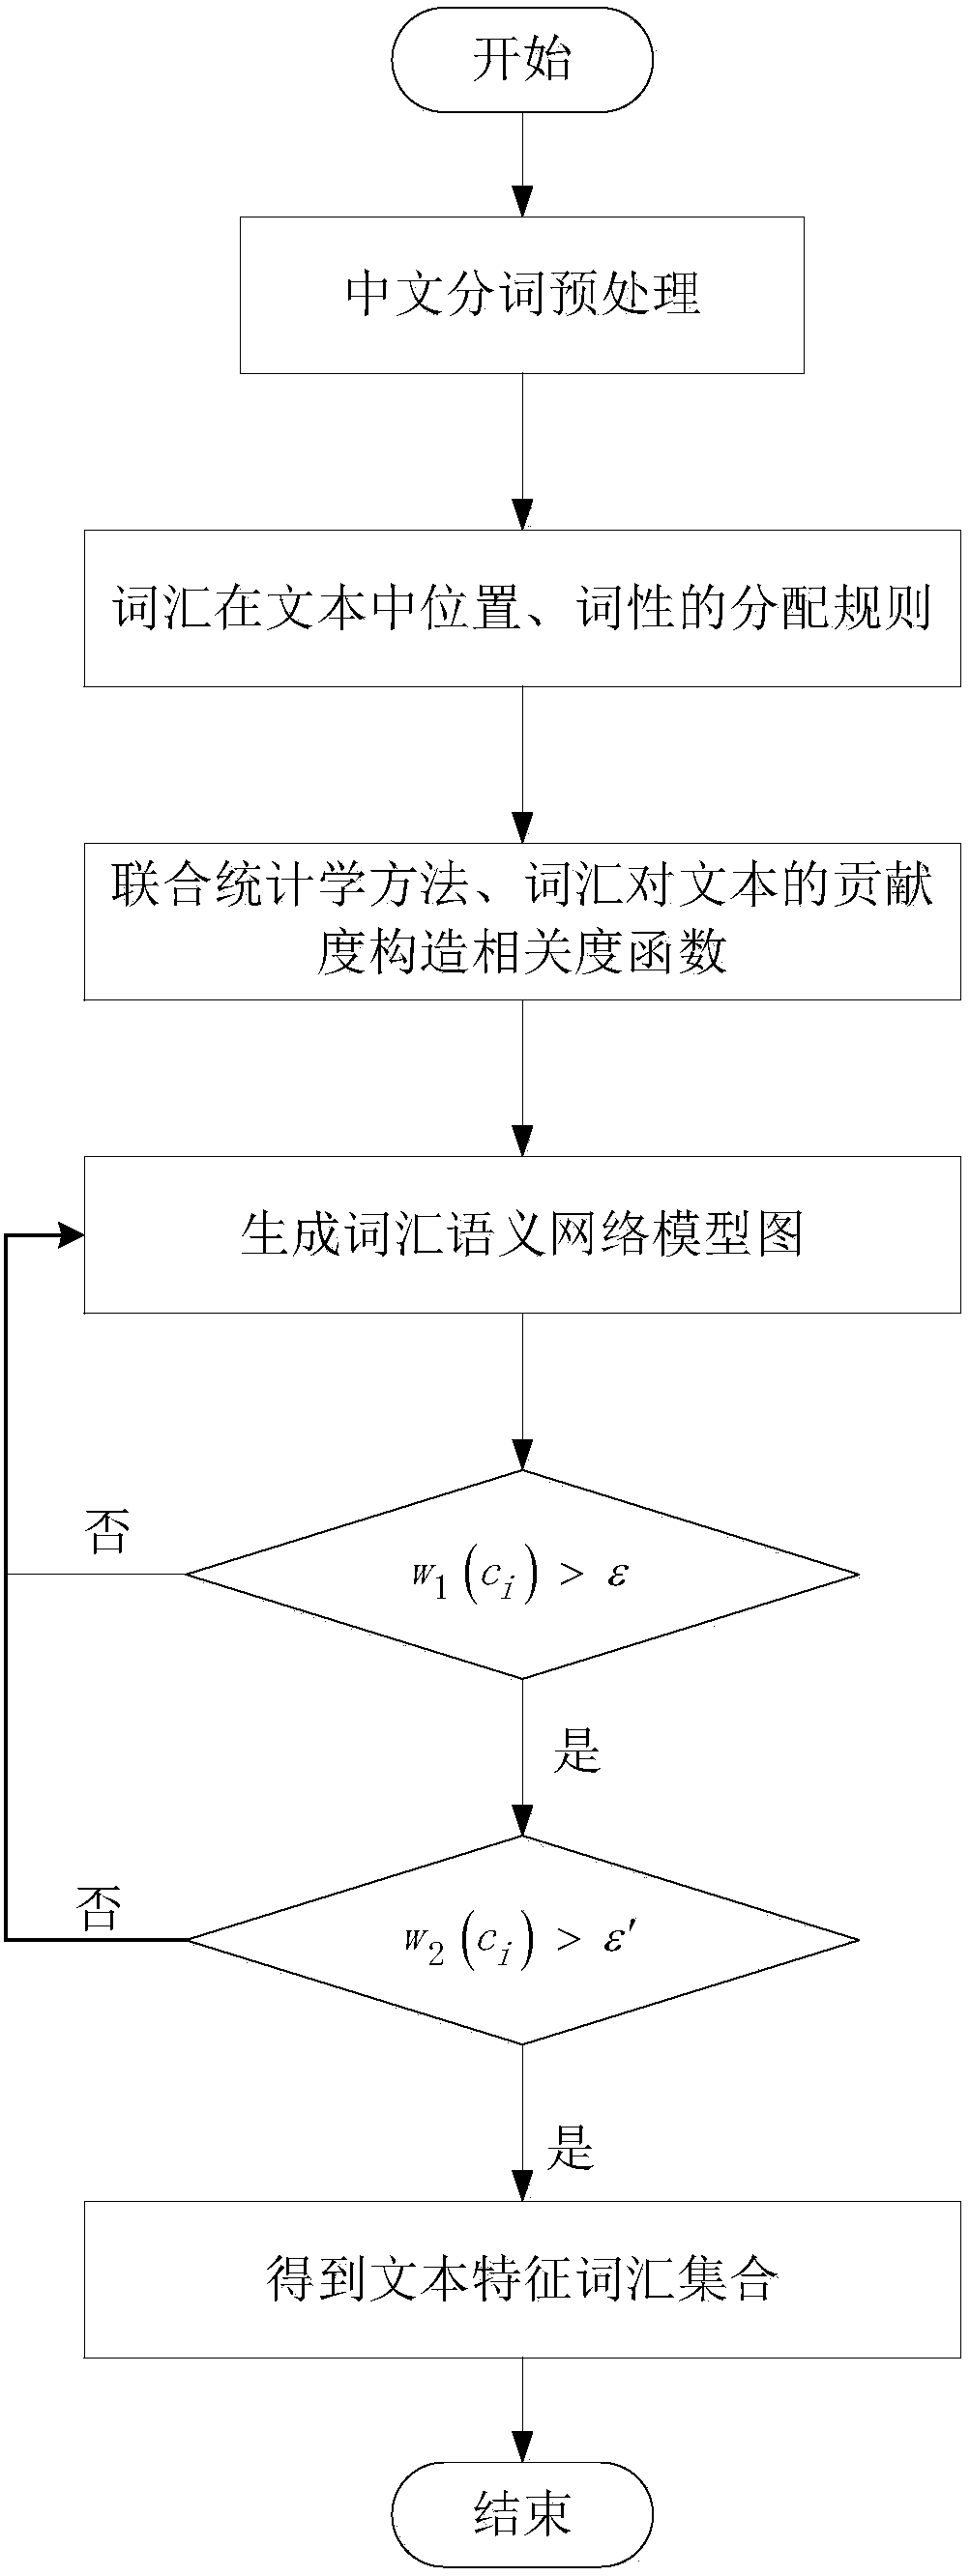 New small world network model realization text feature extraction method